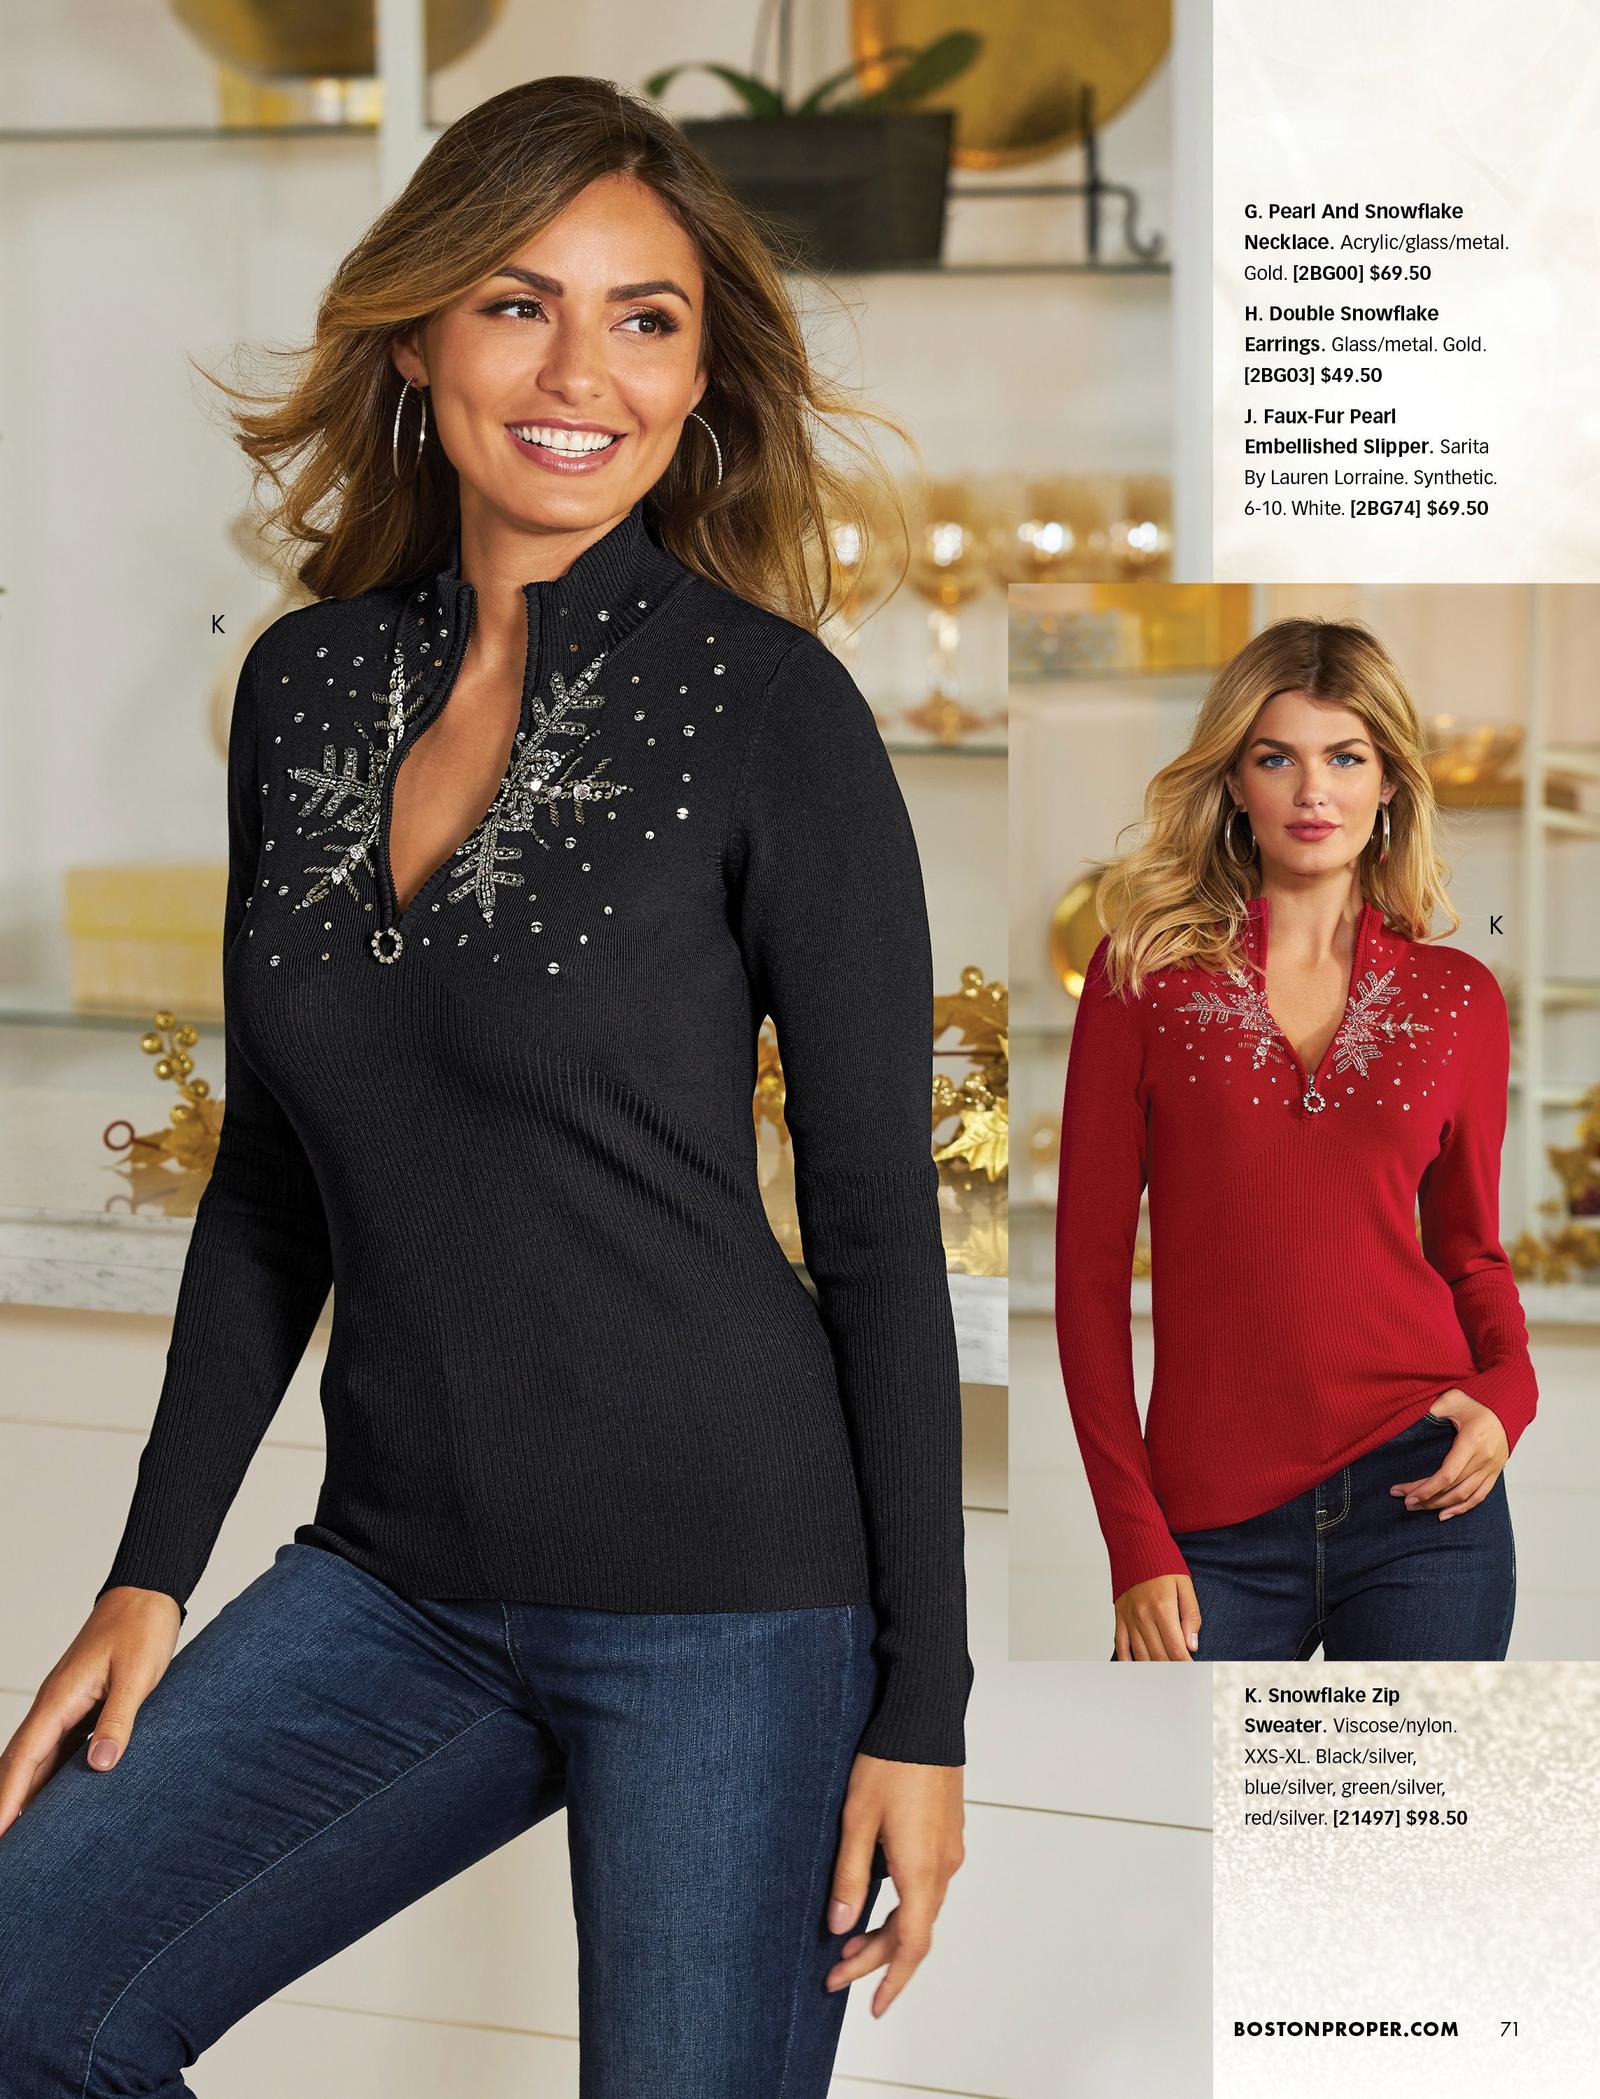 left model wearing a black half zip snowflake embellished sweater and jeans. right model wearing same sweater in red.